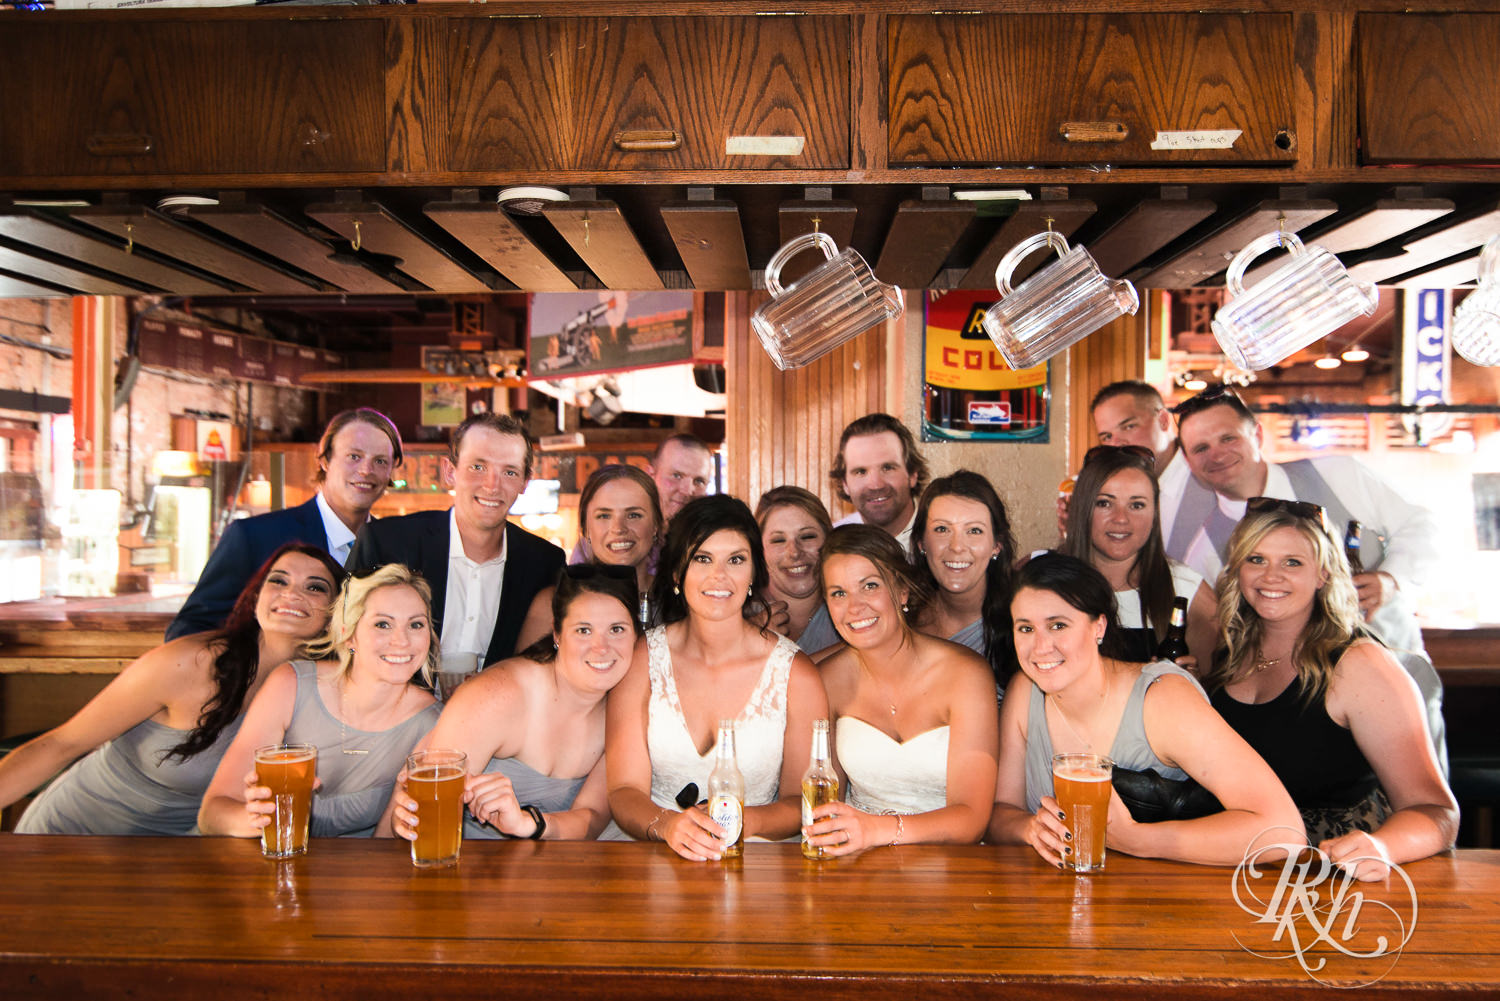 Lesbian brides smiles with wedding party in a bar in Duluth, Minnesota.